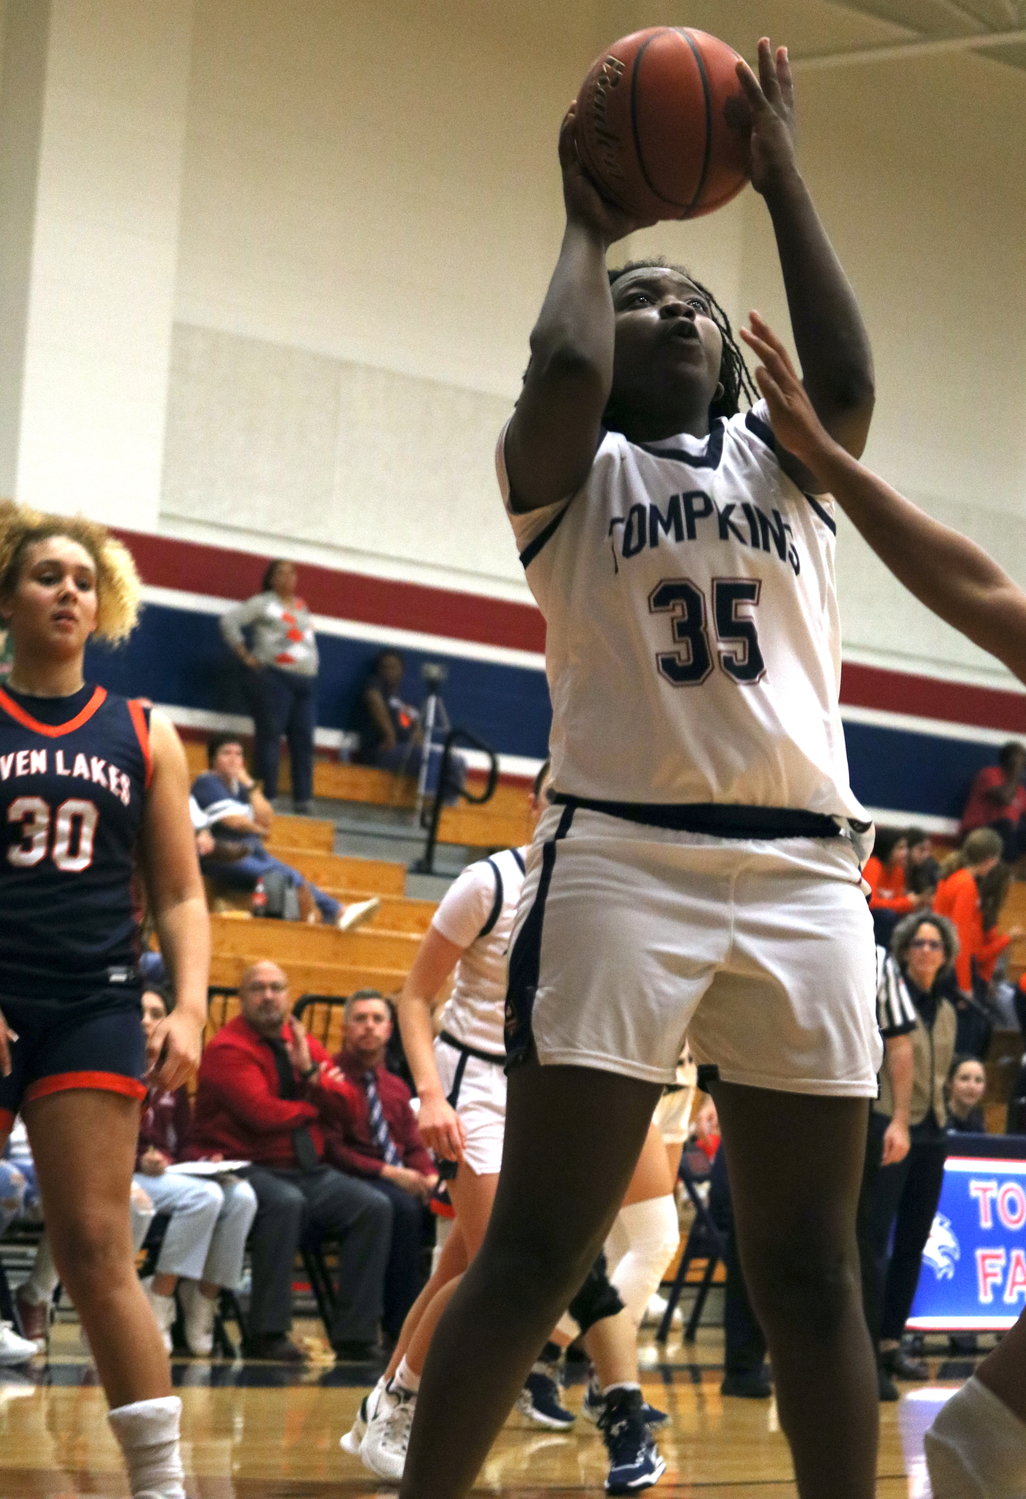 Fiyinfoluwa Adeleye goes up for a layup during Tuesday’s District 19-6A game between Tompkins and Seven Lakes at the Tompkins gym.